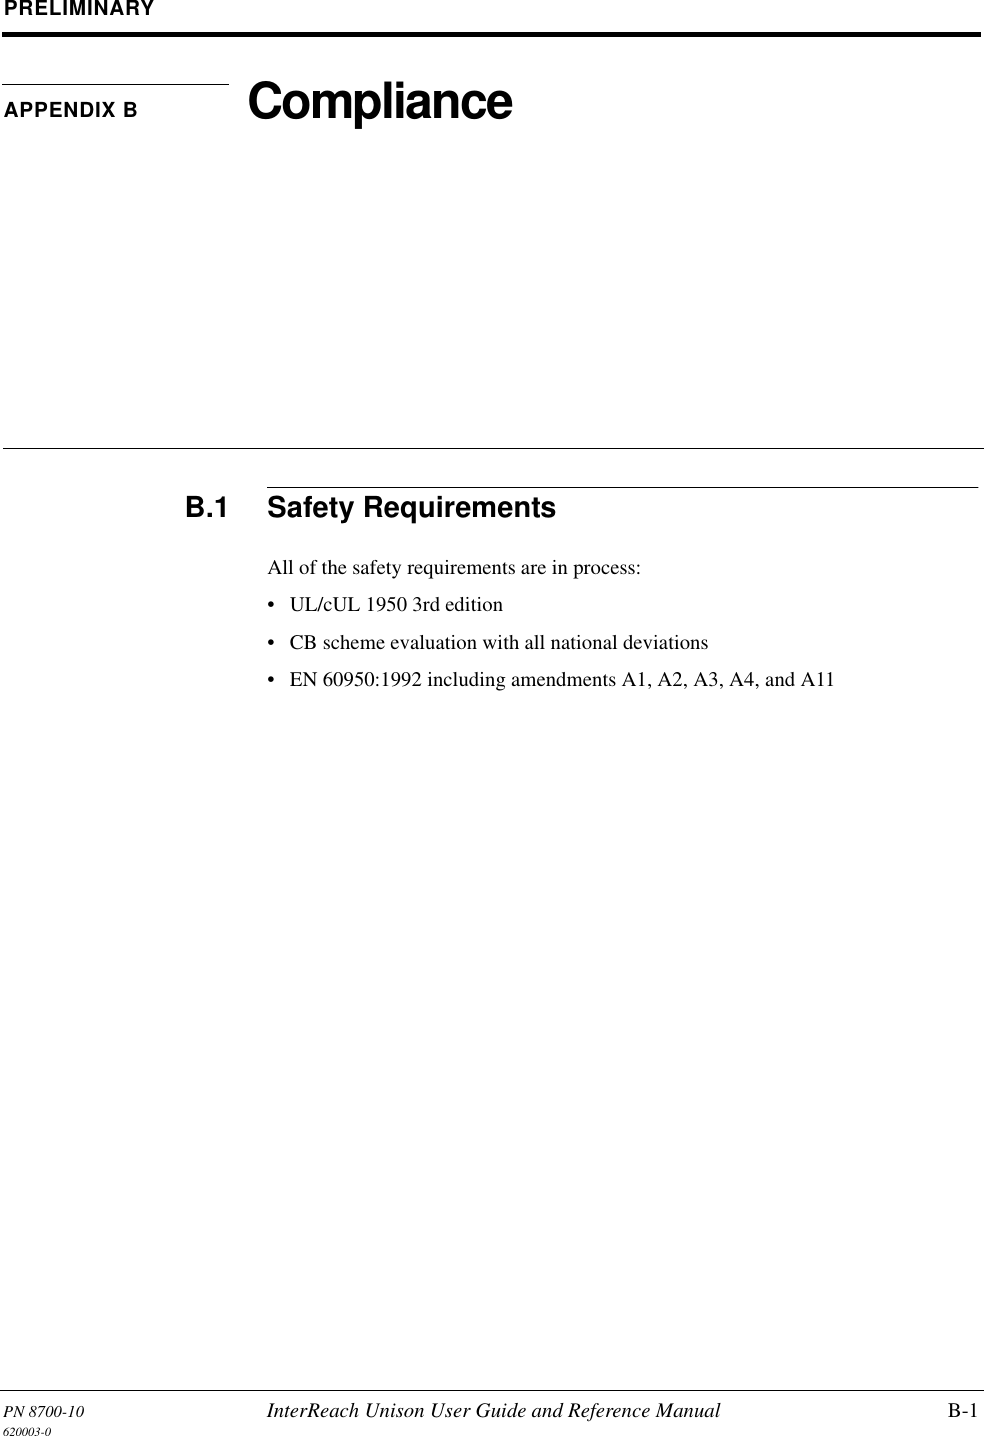 PN 8700-10 InterReach Unison User Guide and Reference Manual B-1620003-0PRELIMINARYAPPENDIX B ComplianceB.1 Safety RequirementsAll of the safety requirements are in process:• UL/cUL 1950 3rd edition• CB scheme evaluation with all national deviations• EN 60950:1992 including amendments A1, A2, A3, A4, and A11